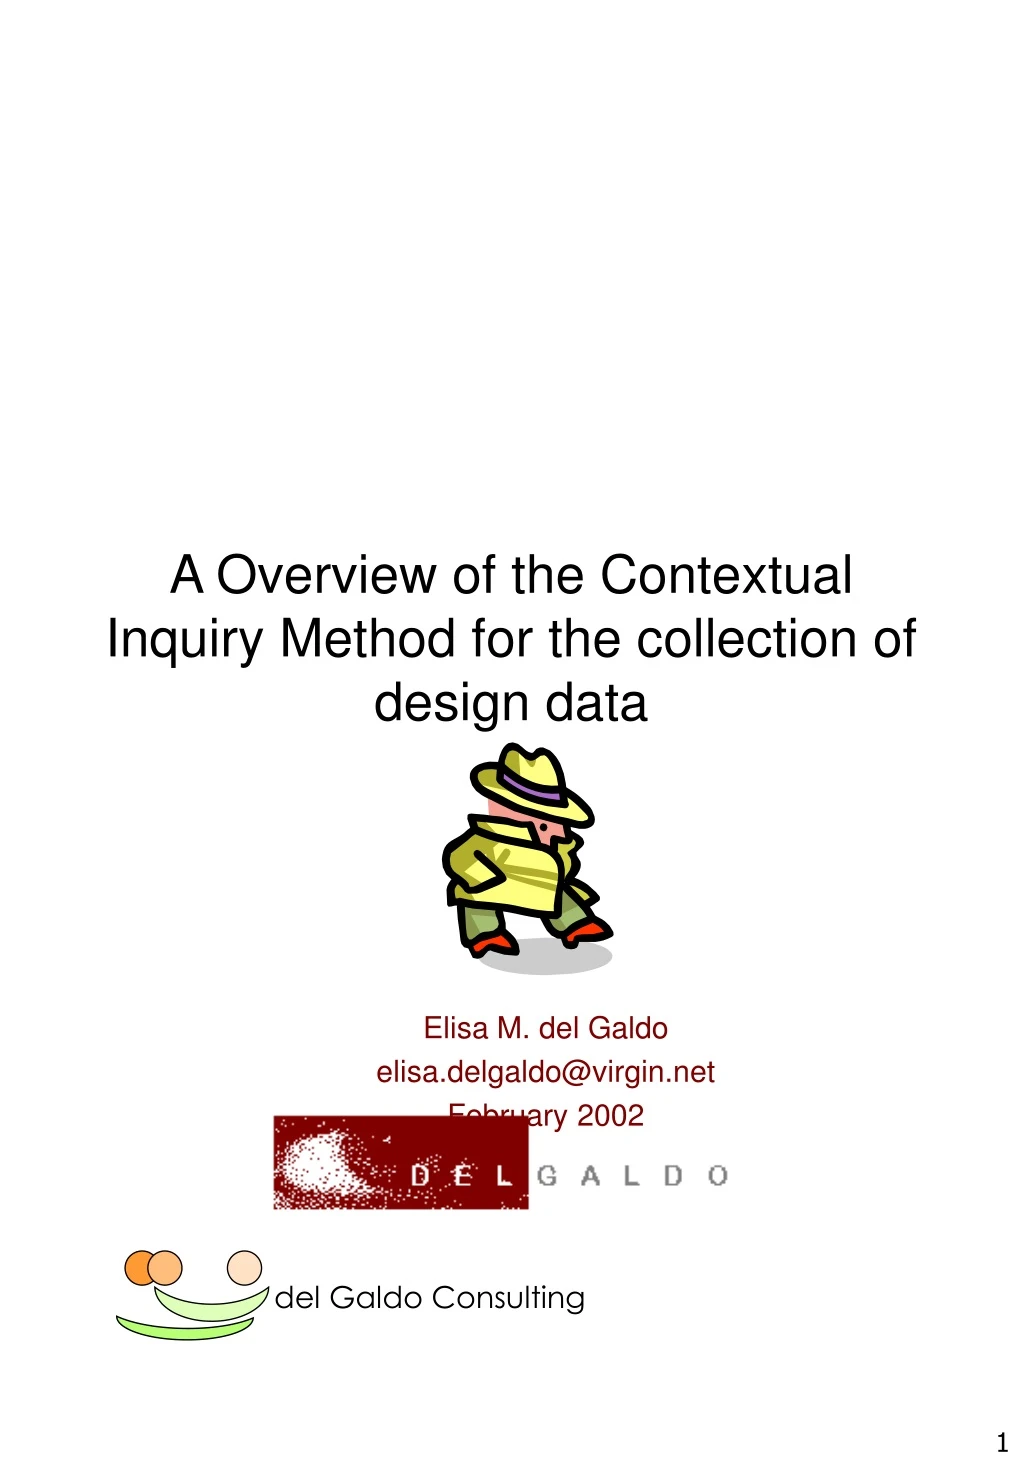 a overview of the contextual inquiry method for the collection of design data